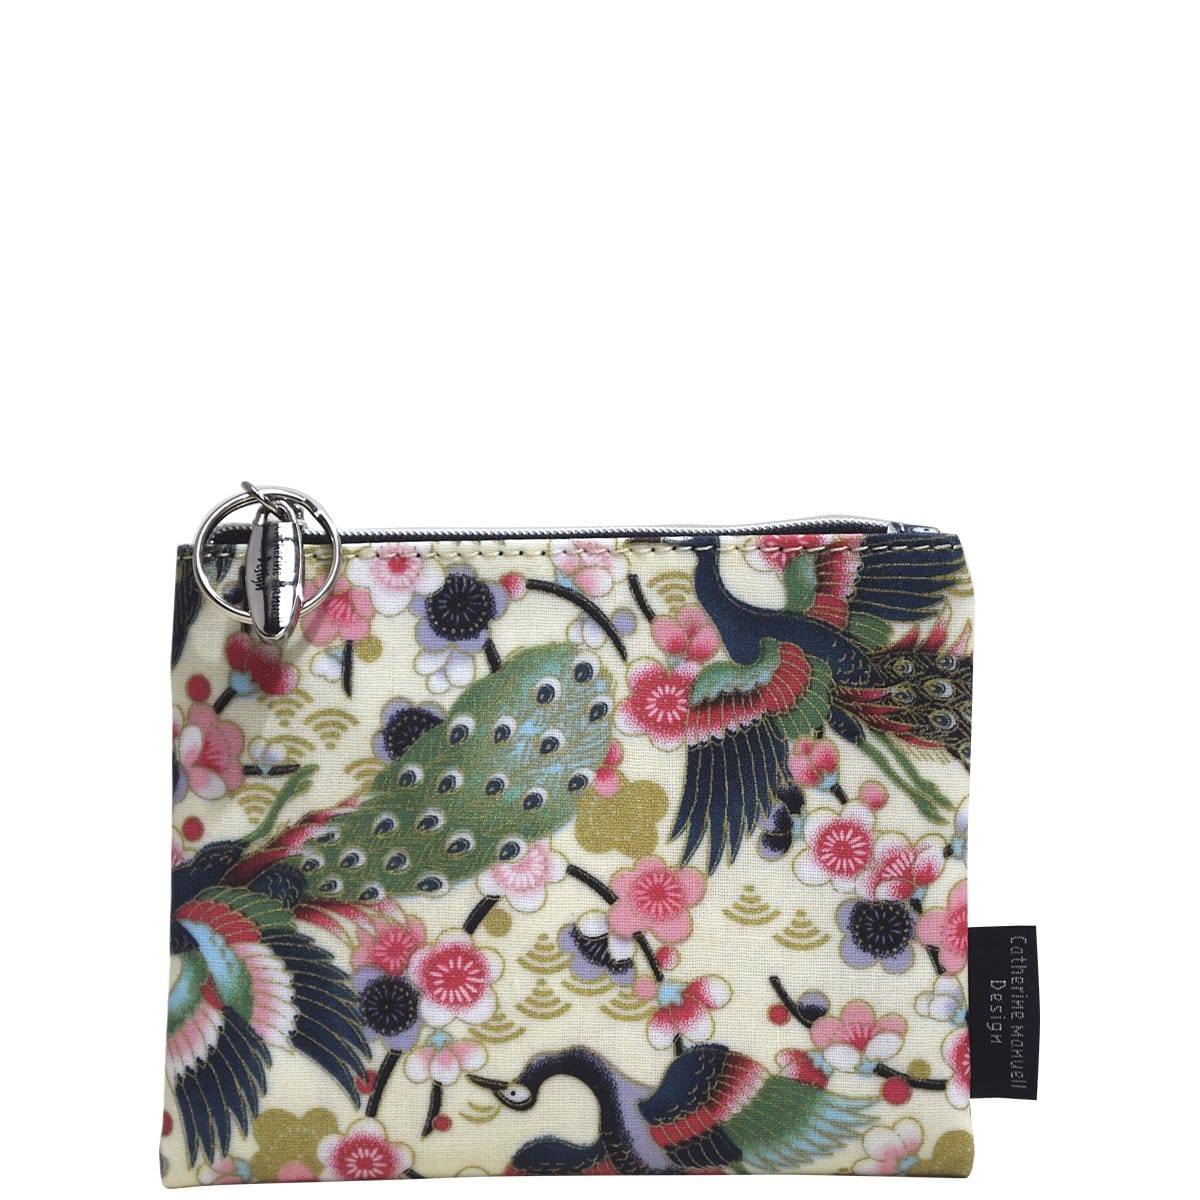 Everyday Purse - Peacock Canvas - 20% off